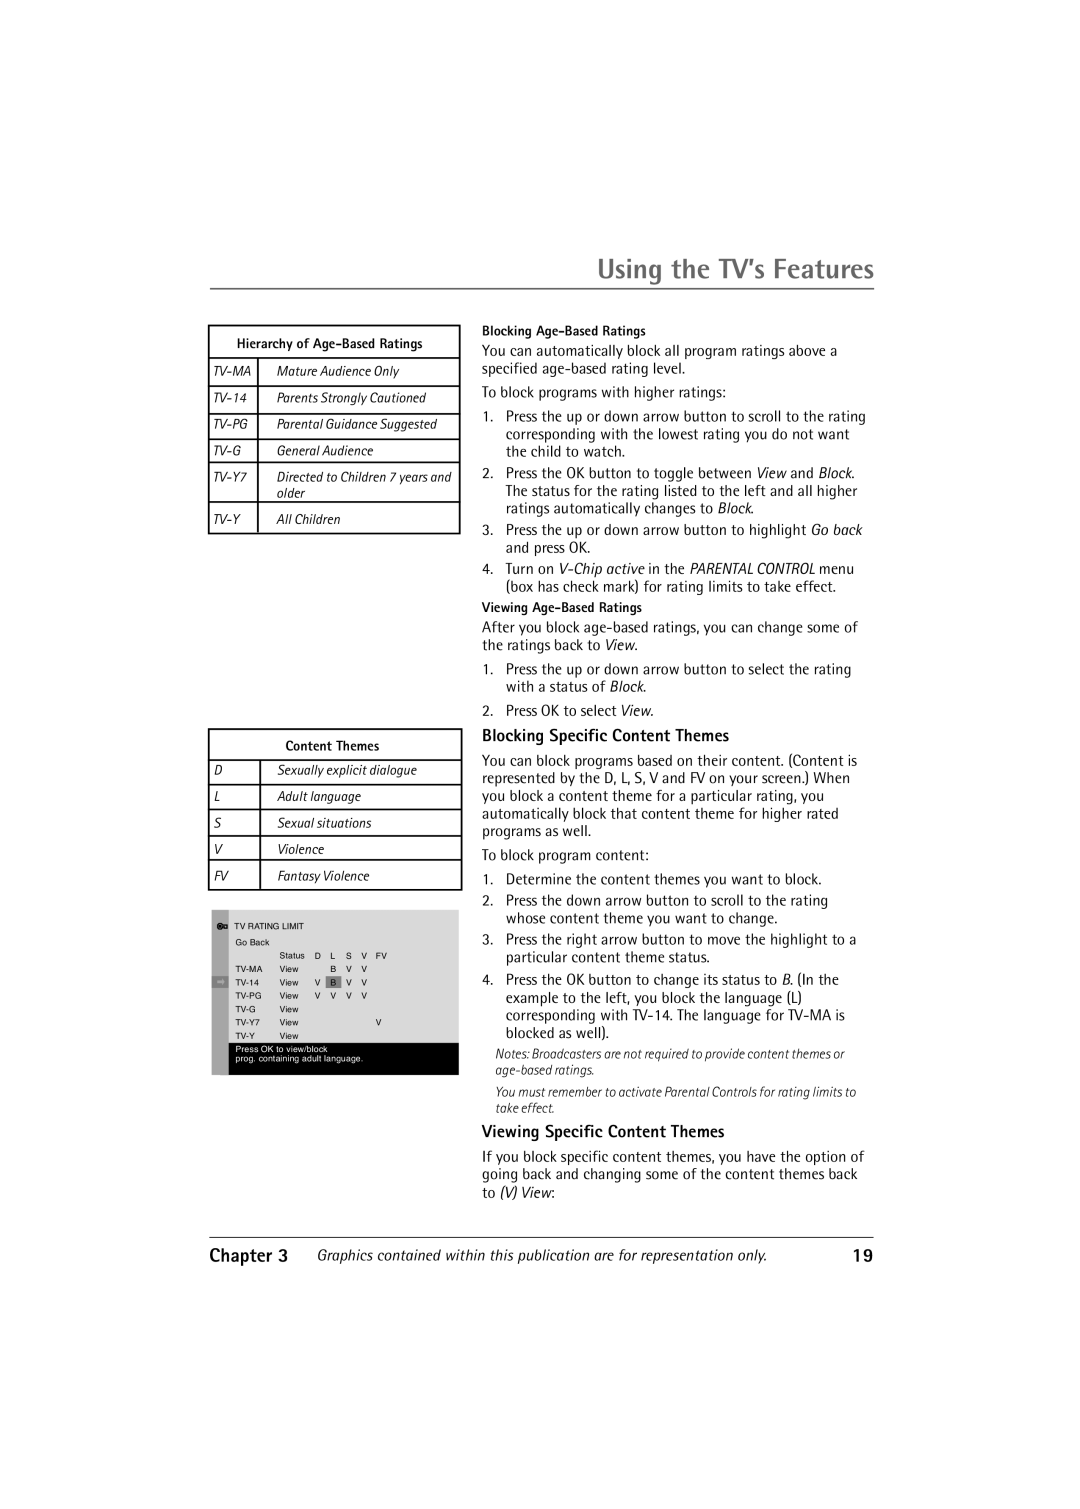 RCA 36V430T manual Using the TV’s Features, Blocking Specific Content Themes, Viewing Specific Content Themes, Chapter 